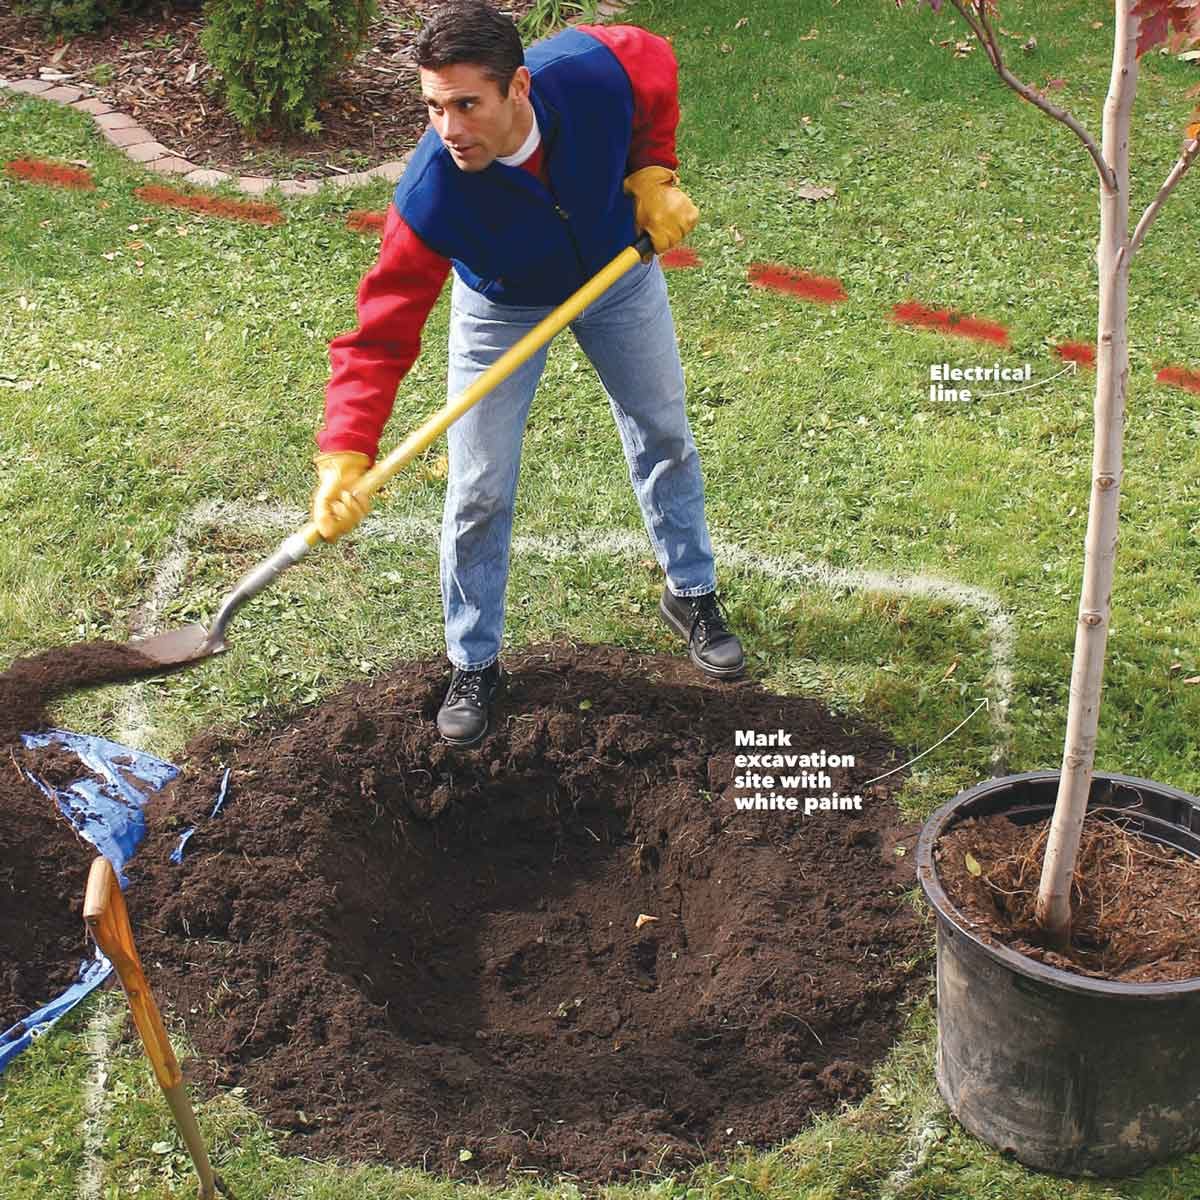 15 Expert Tips for Digging Holes